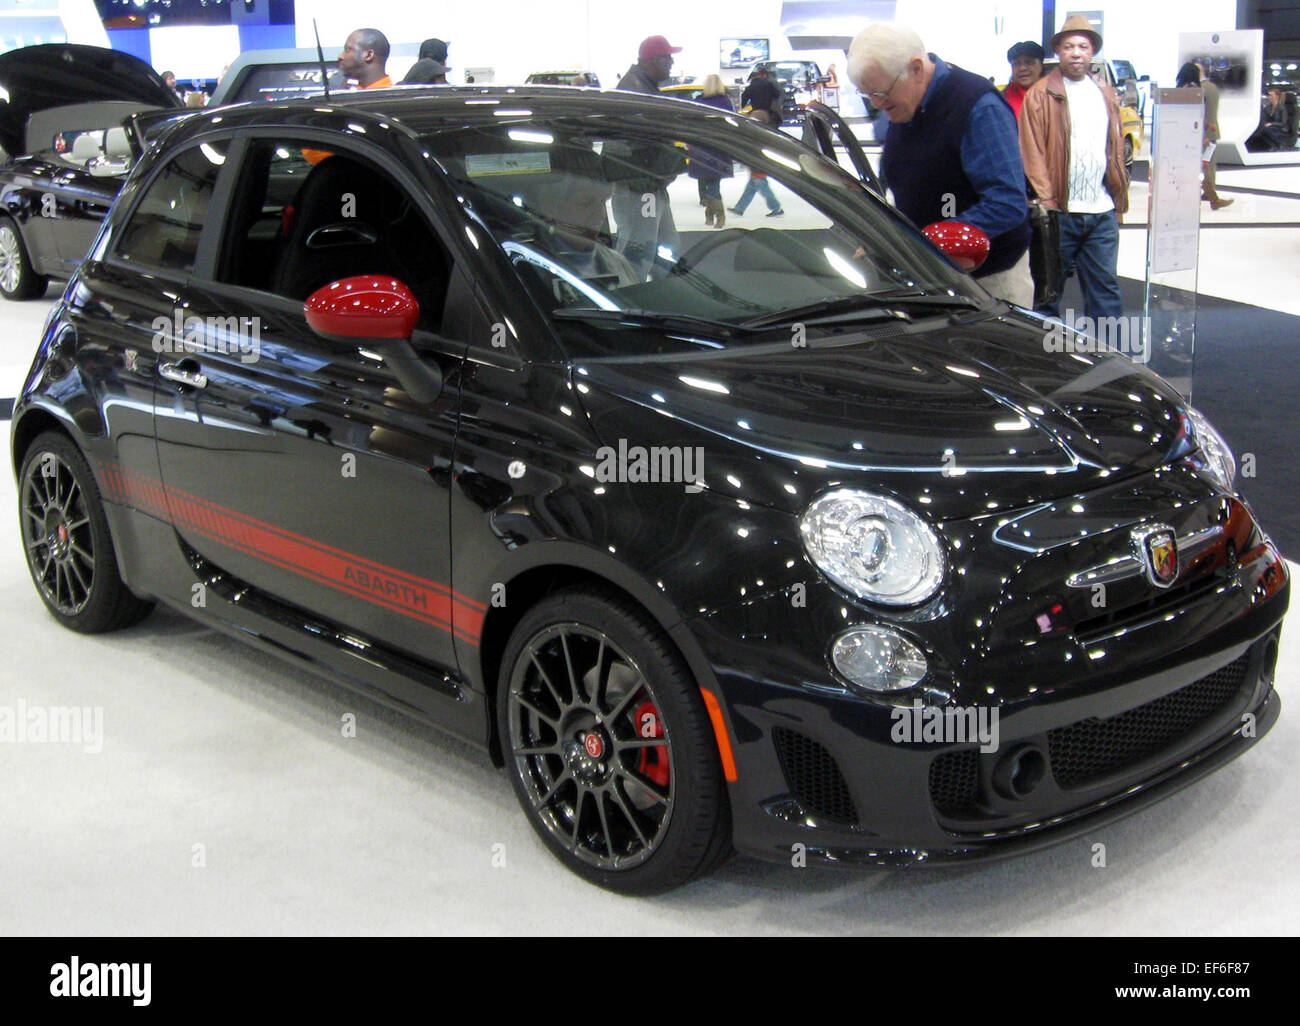 Review: 2012 Fiat 500 Abarth The Truth About Cars, 59% OFF